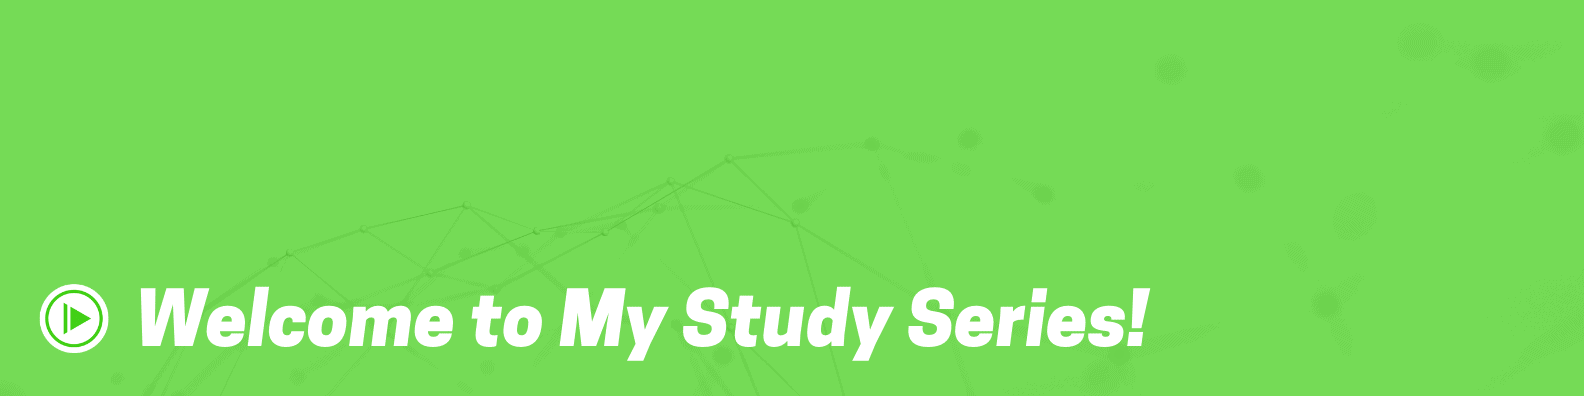 Welcome to My Study Series!